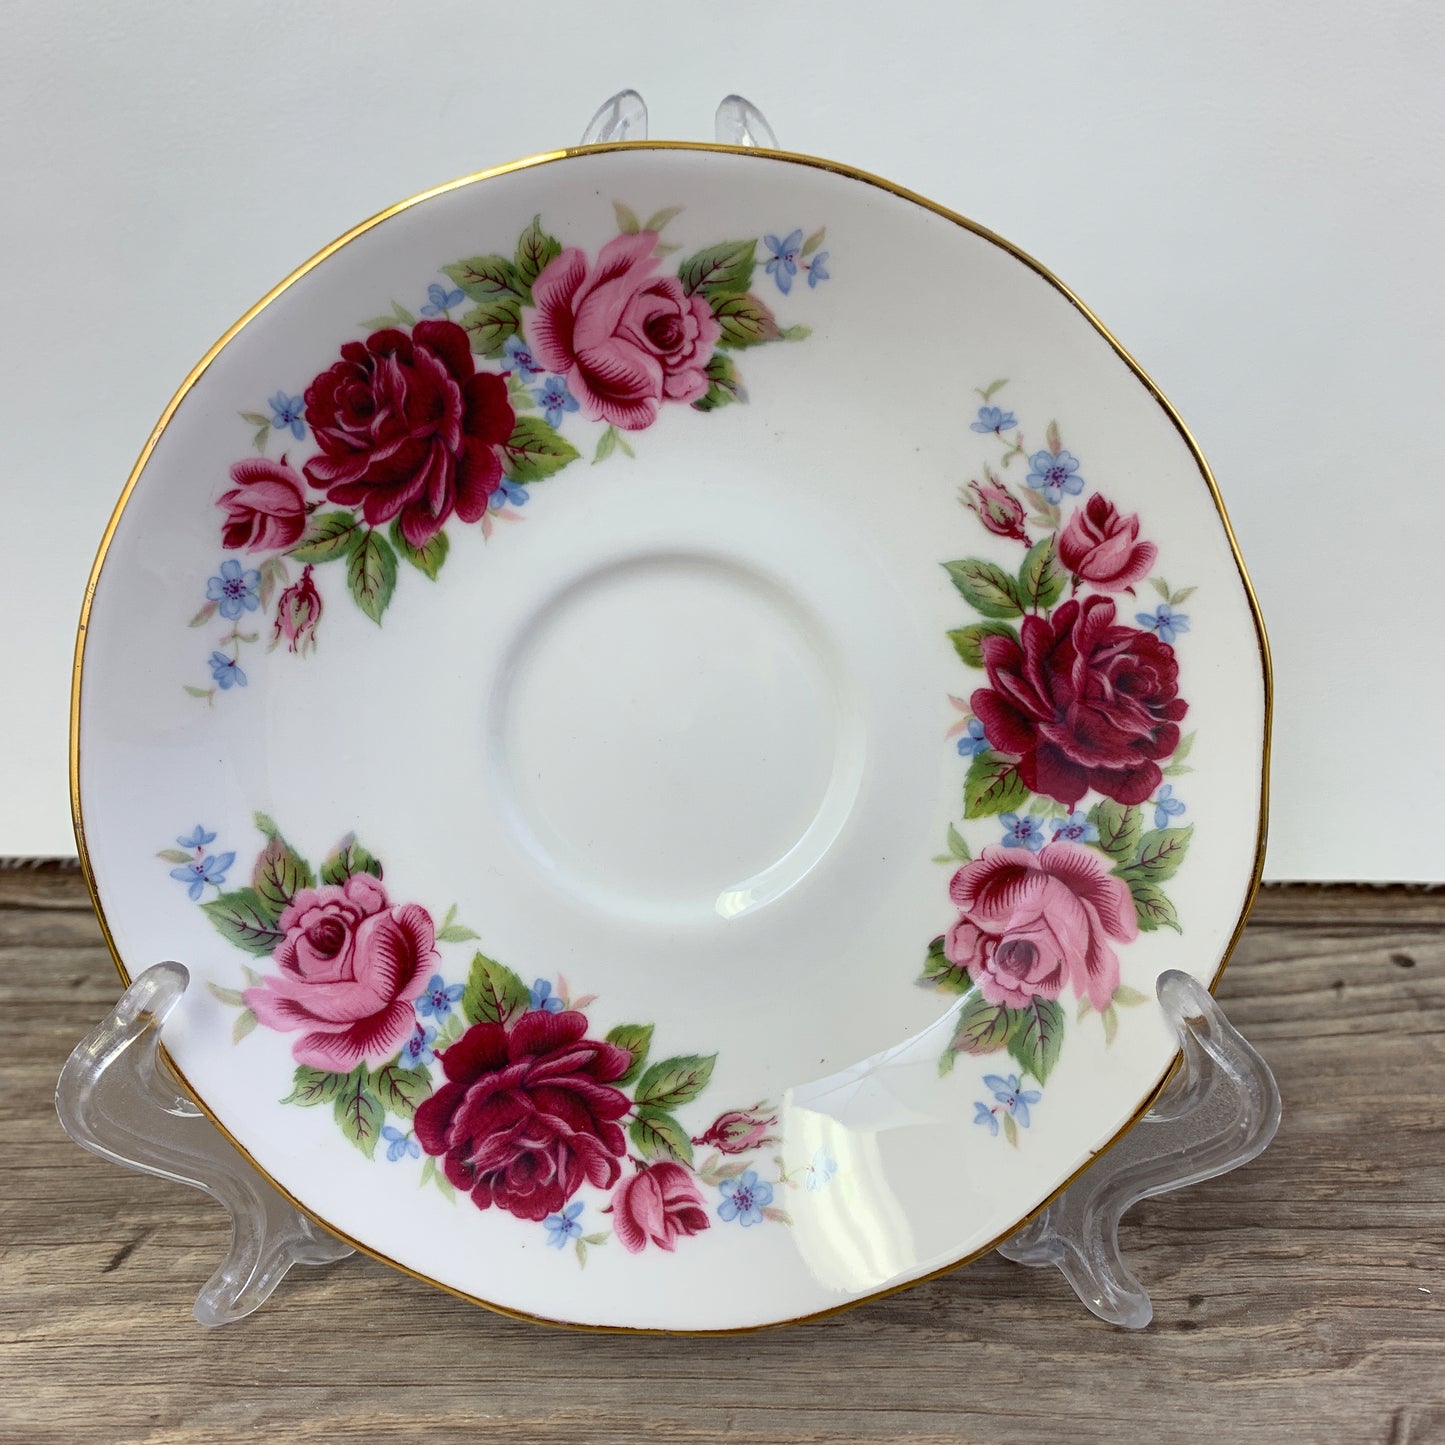 Pink, White and Red Queen Anne Vintage Teacup and Saucer Set